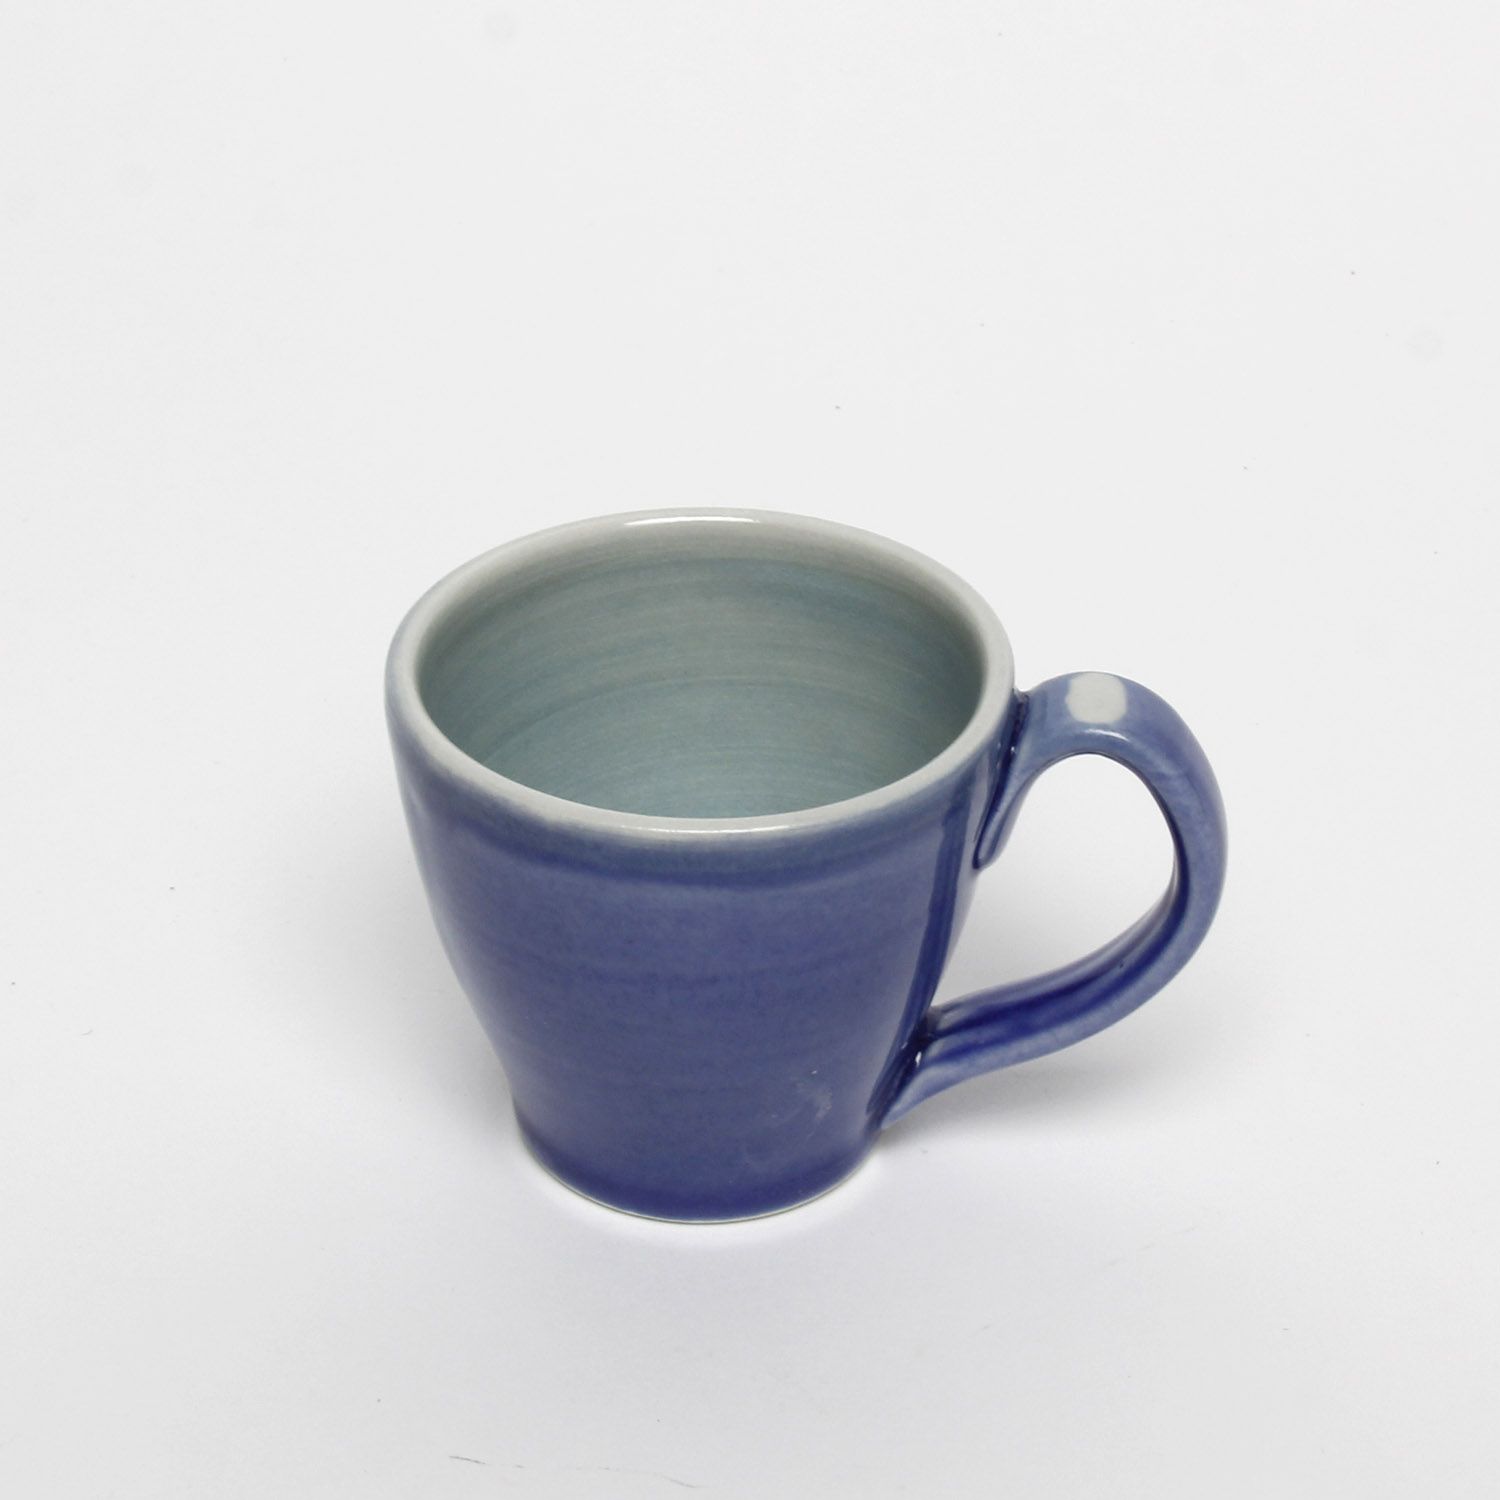 Thomas Aitken: Blue Espresso Cup Product Image 5 of 5